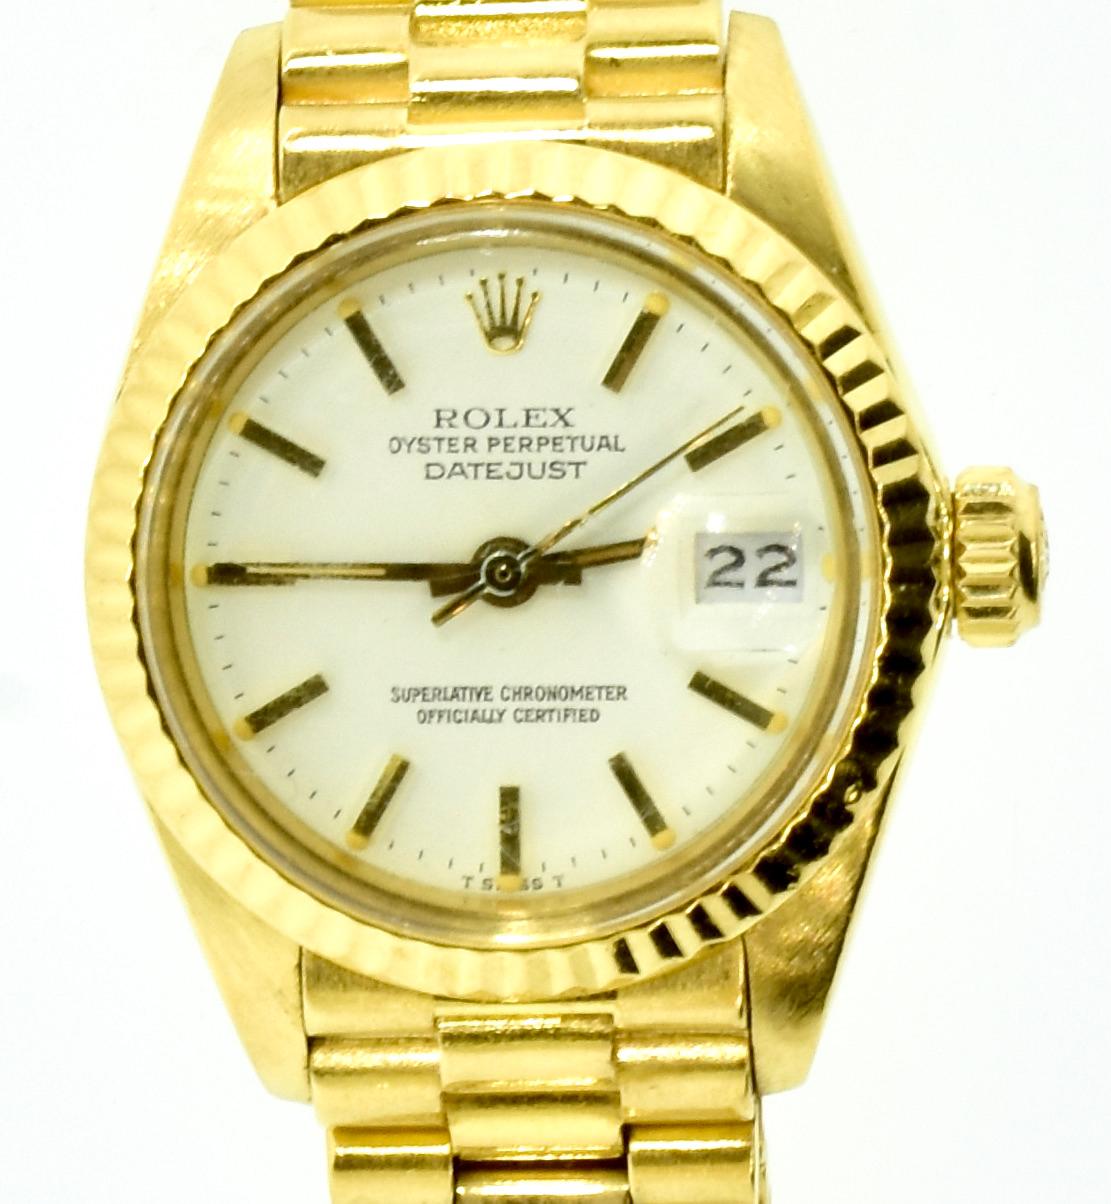 Ladies President Rolex, 26 mm., with original certificate from Rolex and the original purchase receipt with two original Rolex dials - one white and one blue.  Also accompanied the wristwatch are original set of Rolex hands. 
Model R691780
Pressure